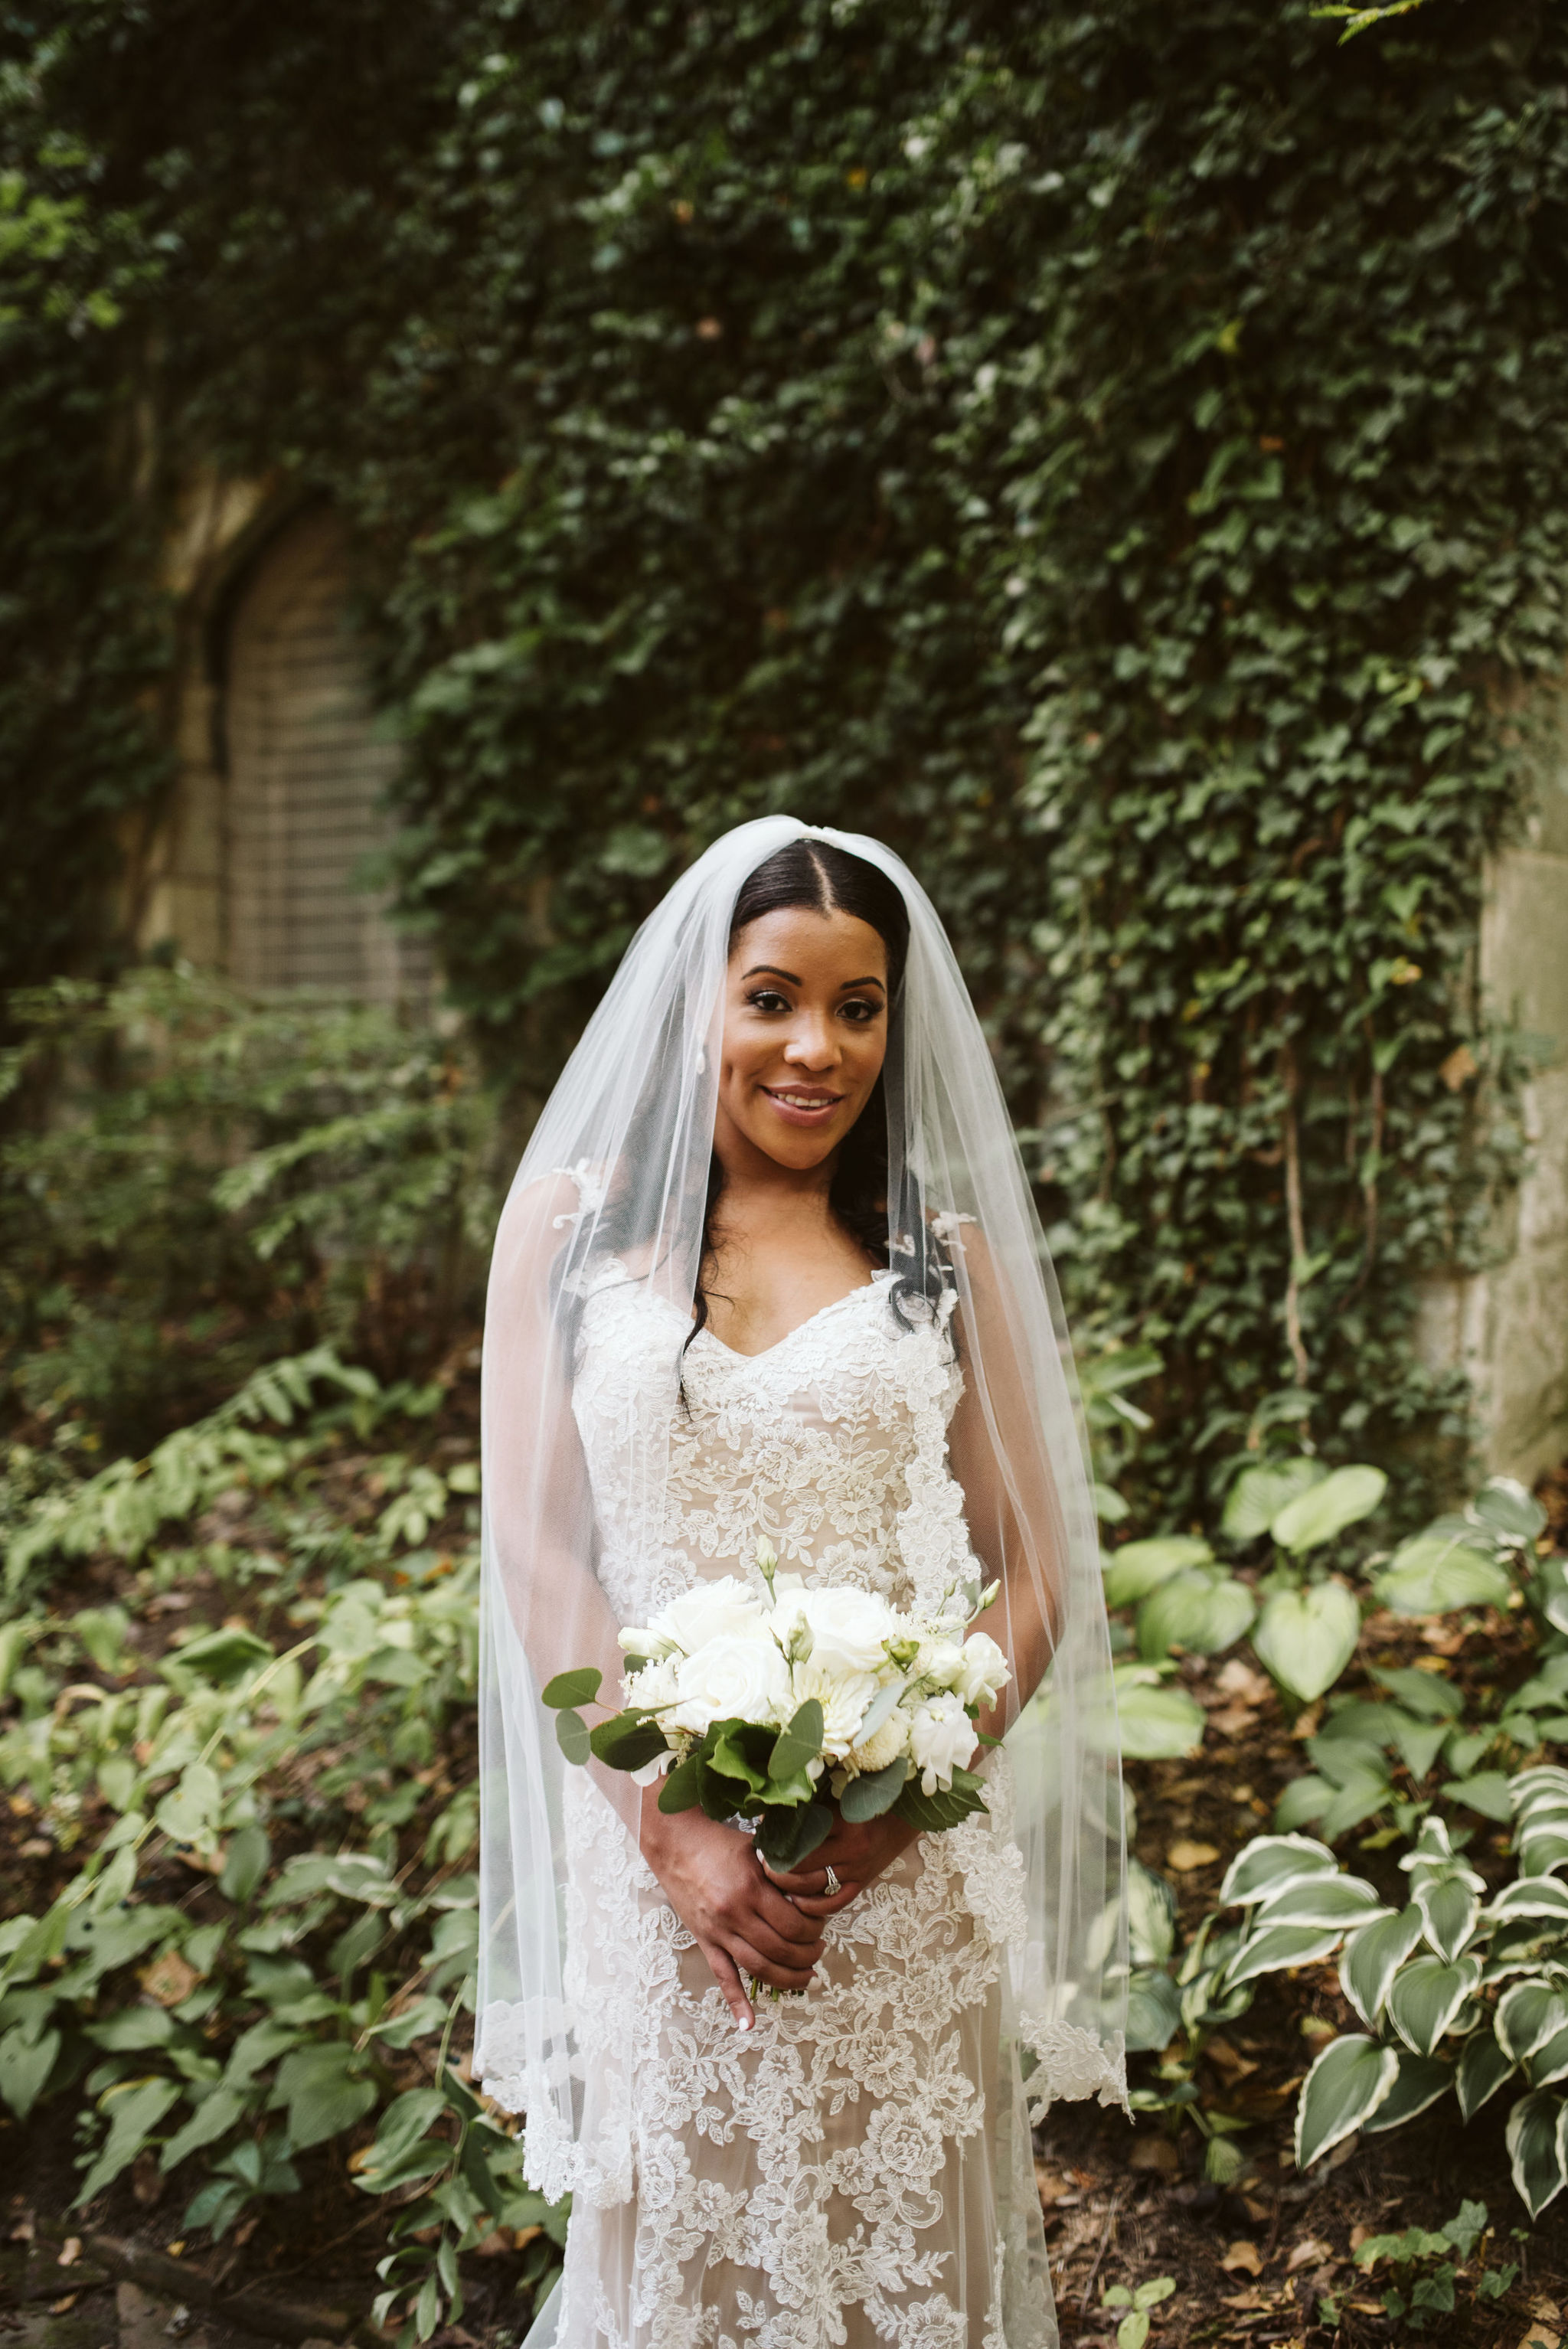  Baltimore, Maryland Wedding Photographer, Mount Vernon, Chase Court, Classic, Outdoor Ceremony, Garden, Romantic, Portrait of Bride in Garden Holding White Bouquet with Long Veil 